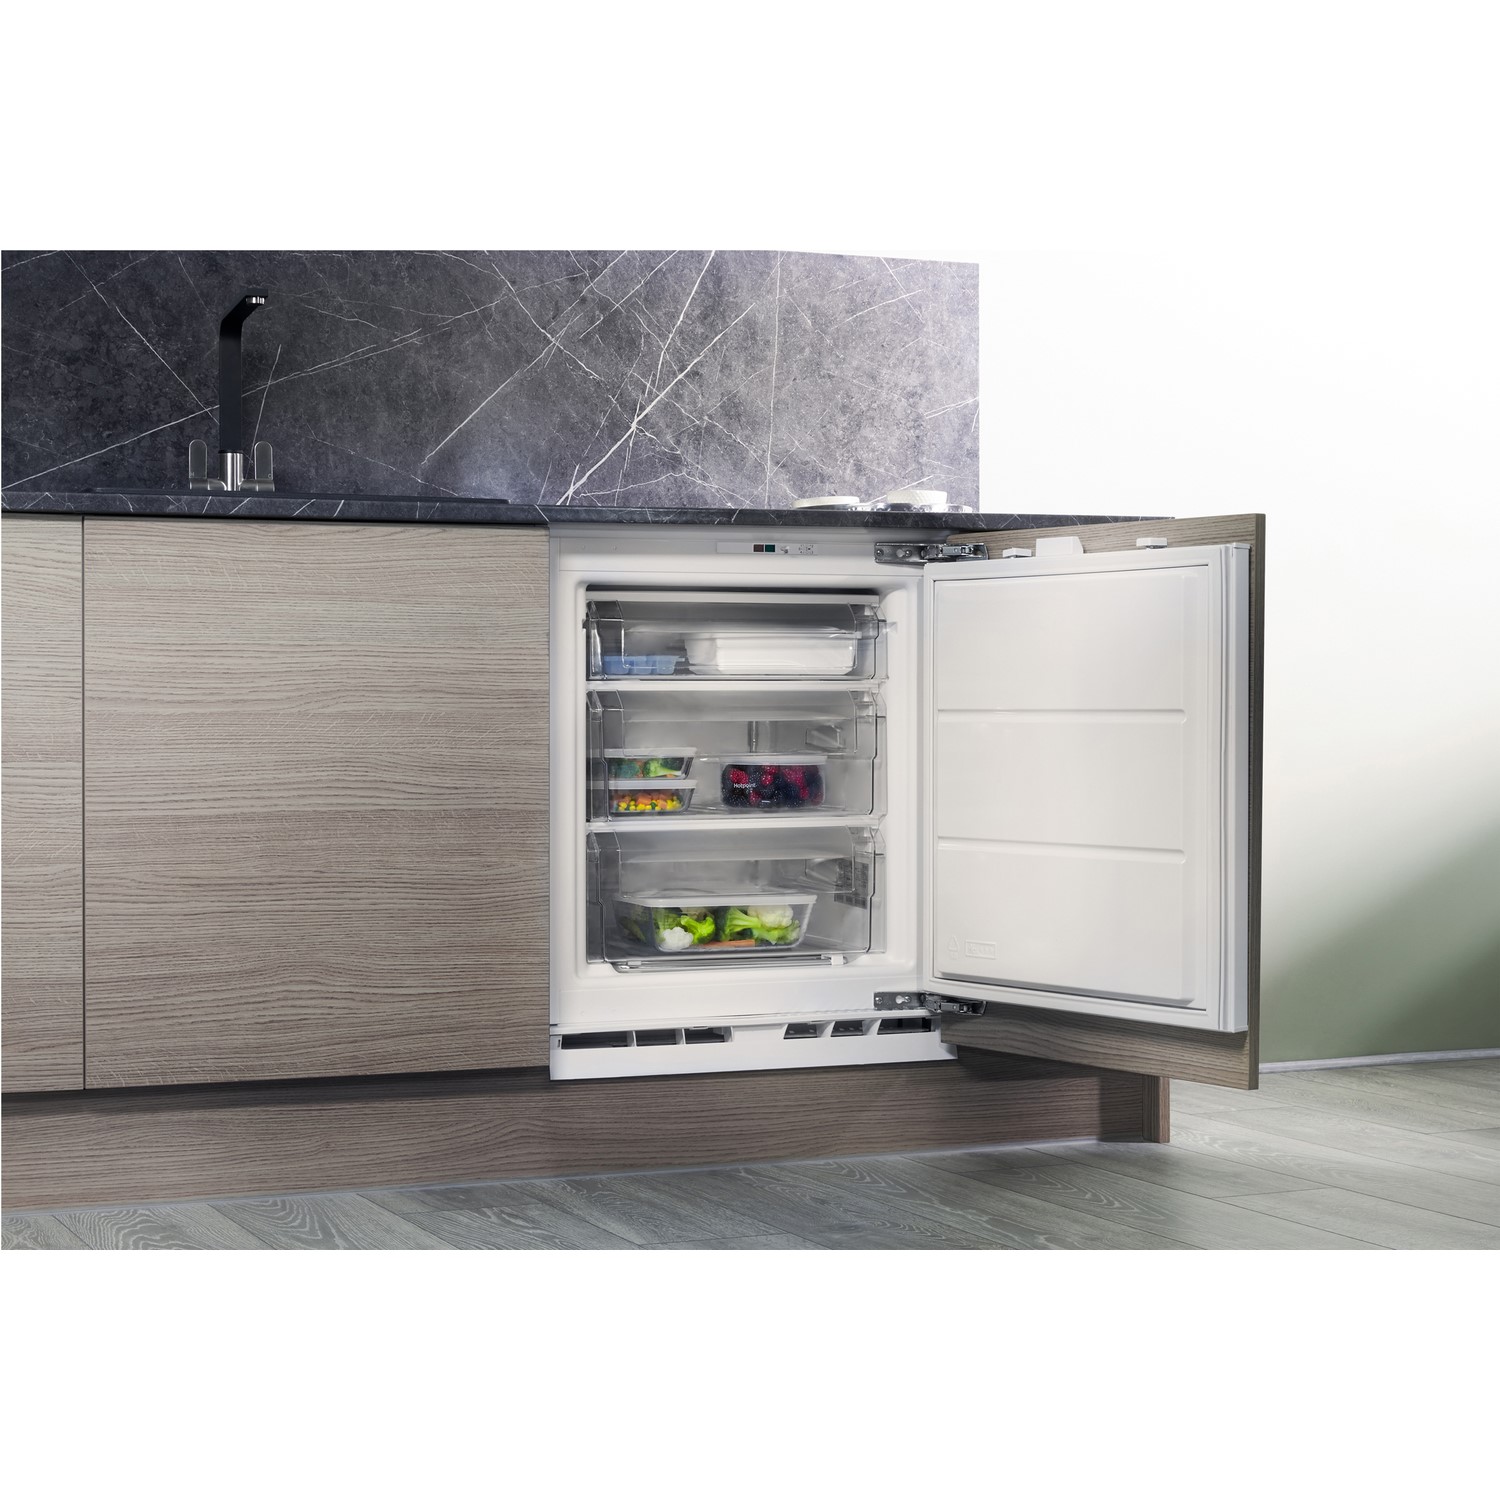 Details about   Hotpoint Integrated Under Counter Freezer